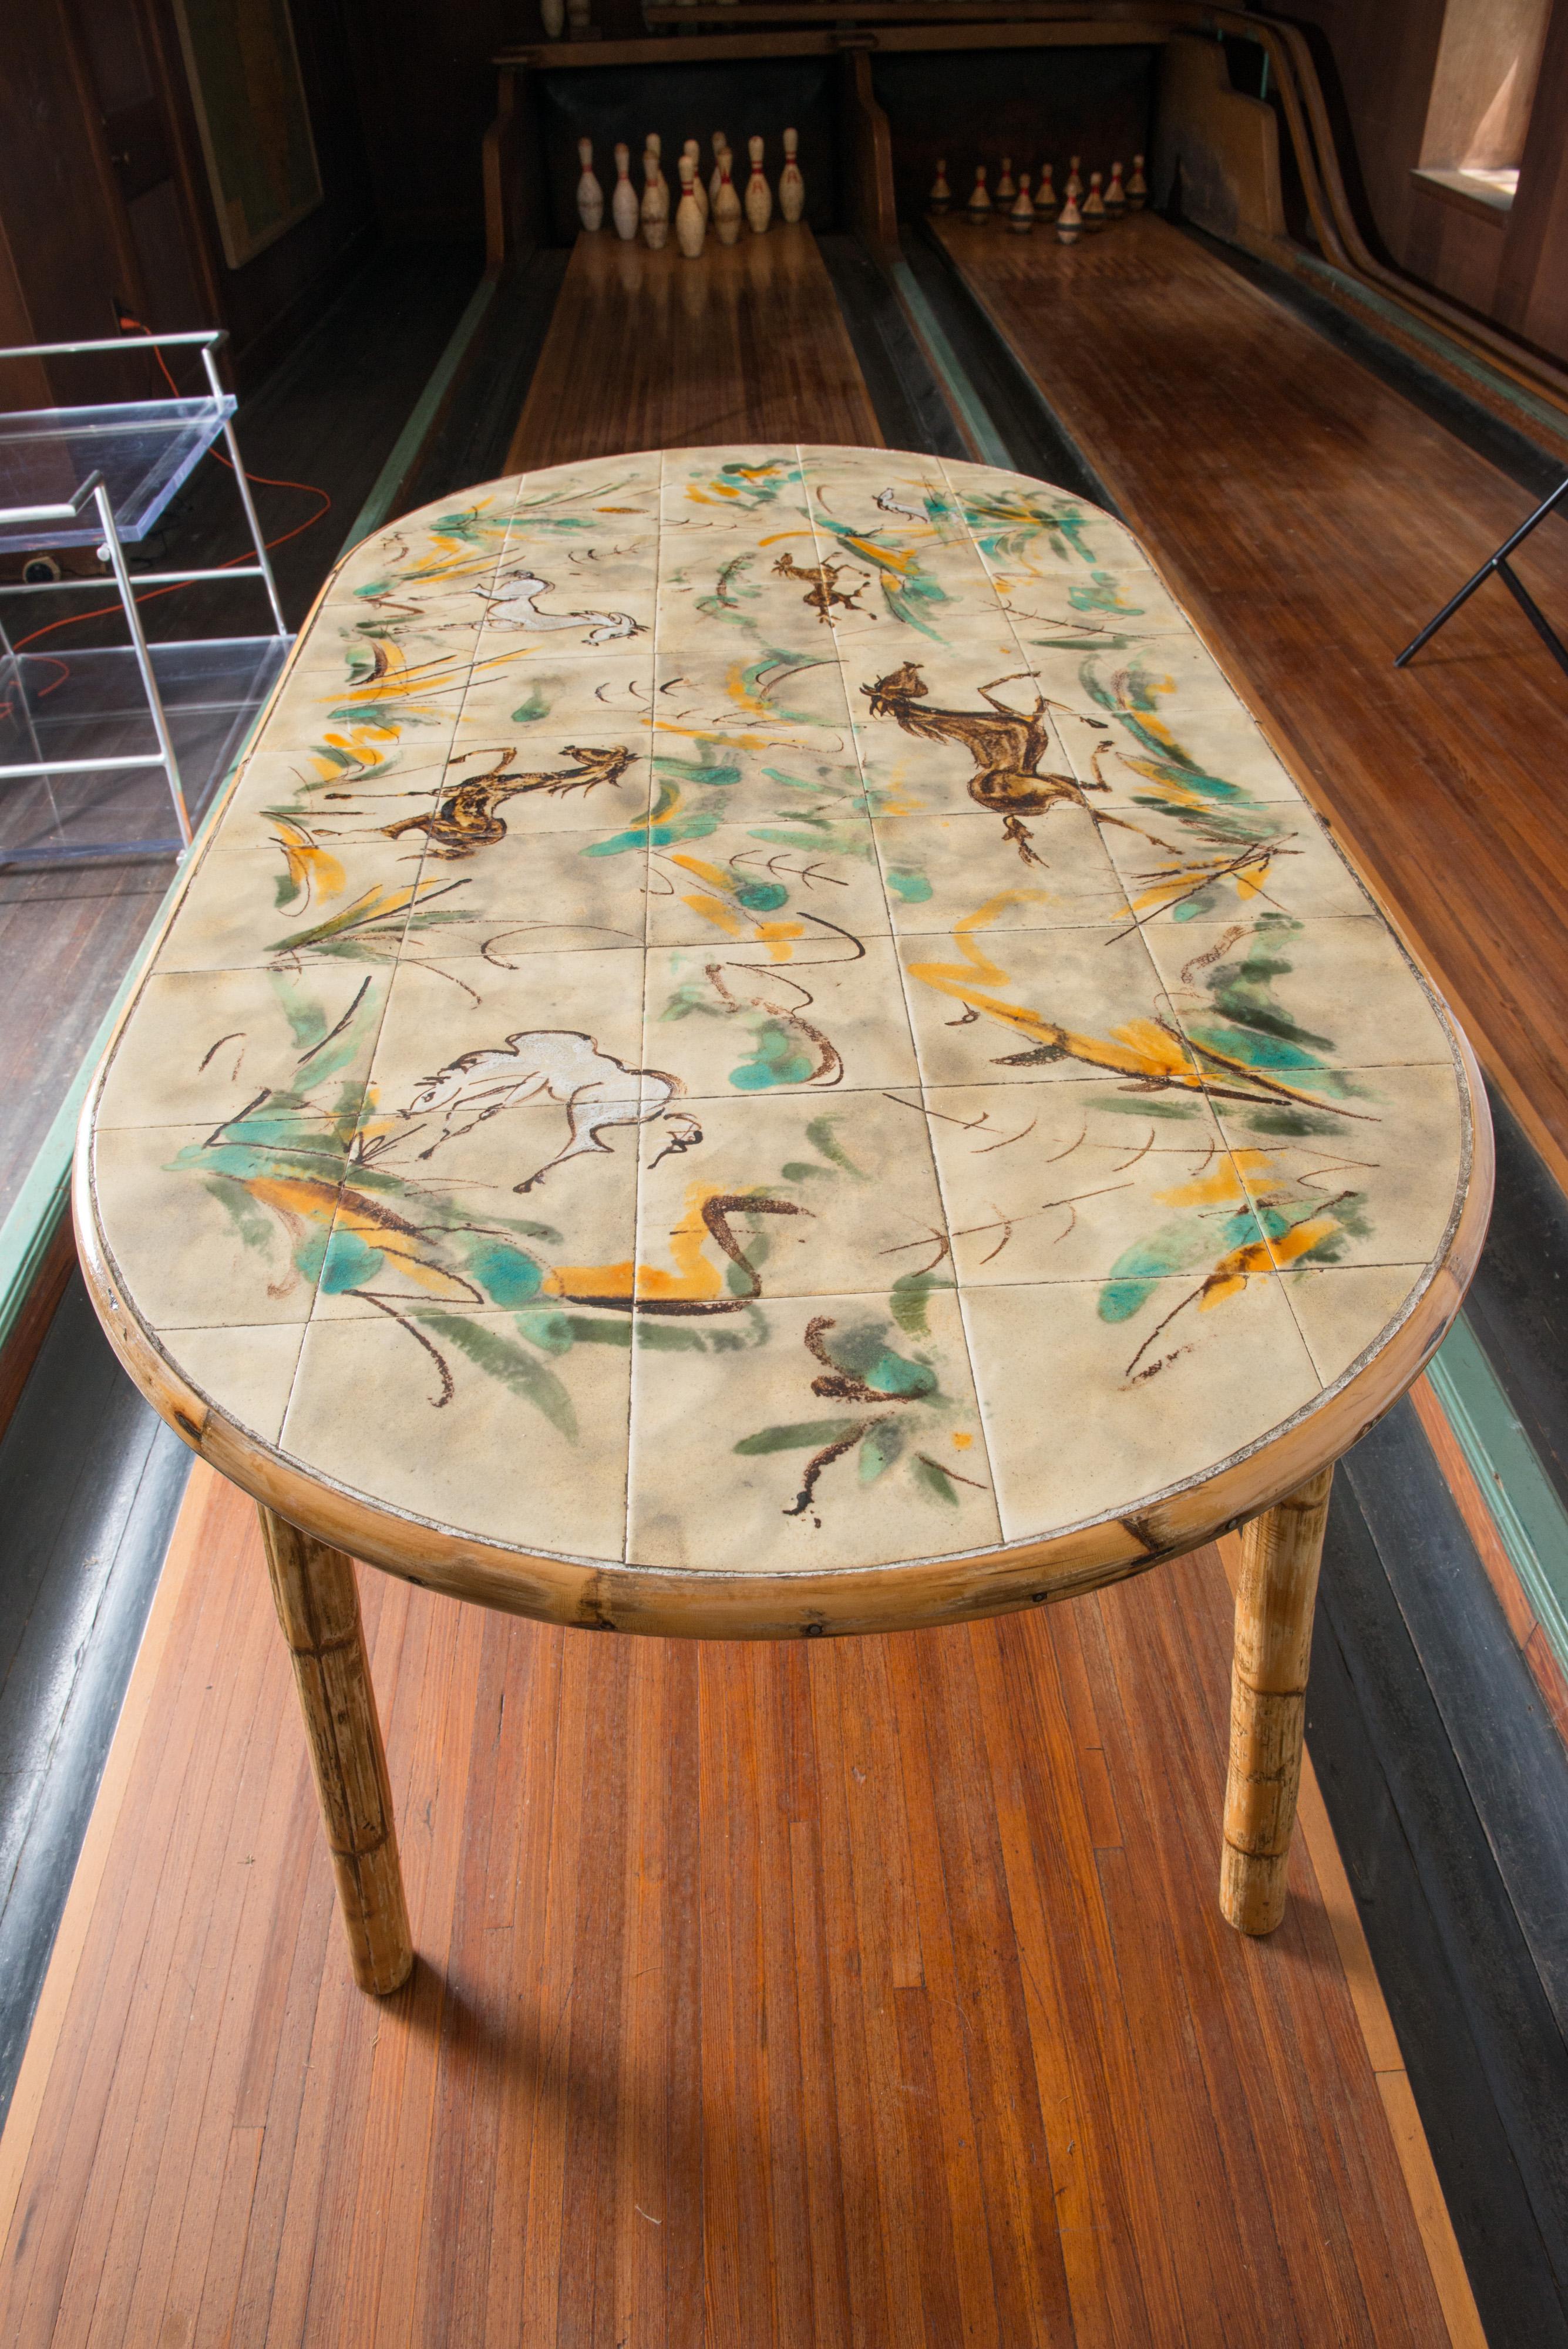 Spectacular 1960s Cote D'Azur signed oval ceramic top rattan table and four rattan chairs by Adrien Audoux and Frida Minet. Modern depiction of horses and grasses ceramic tiles signed by renown artist Georges Chassin. The four rattan chairs are in